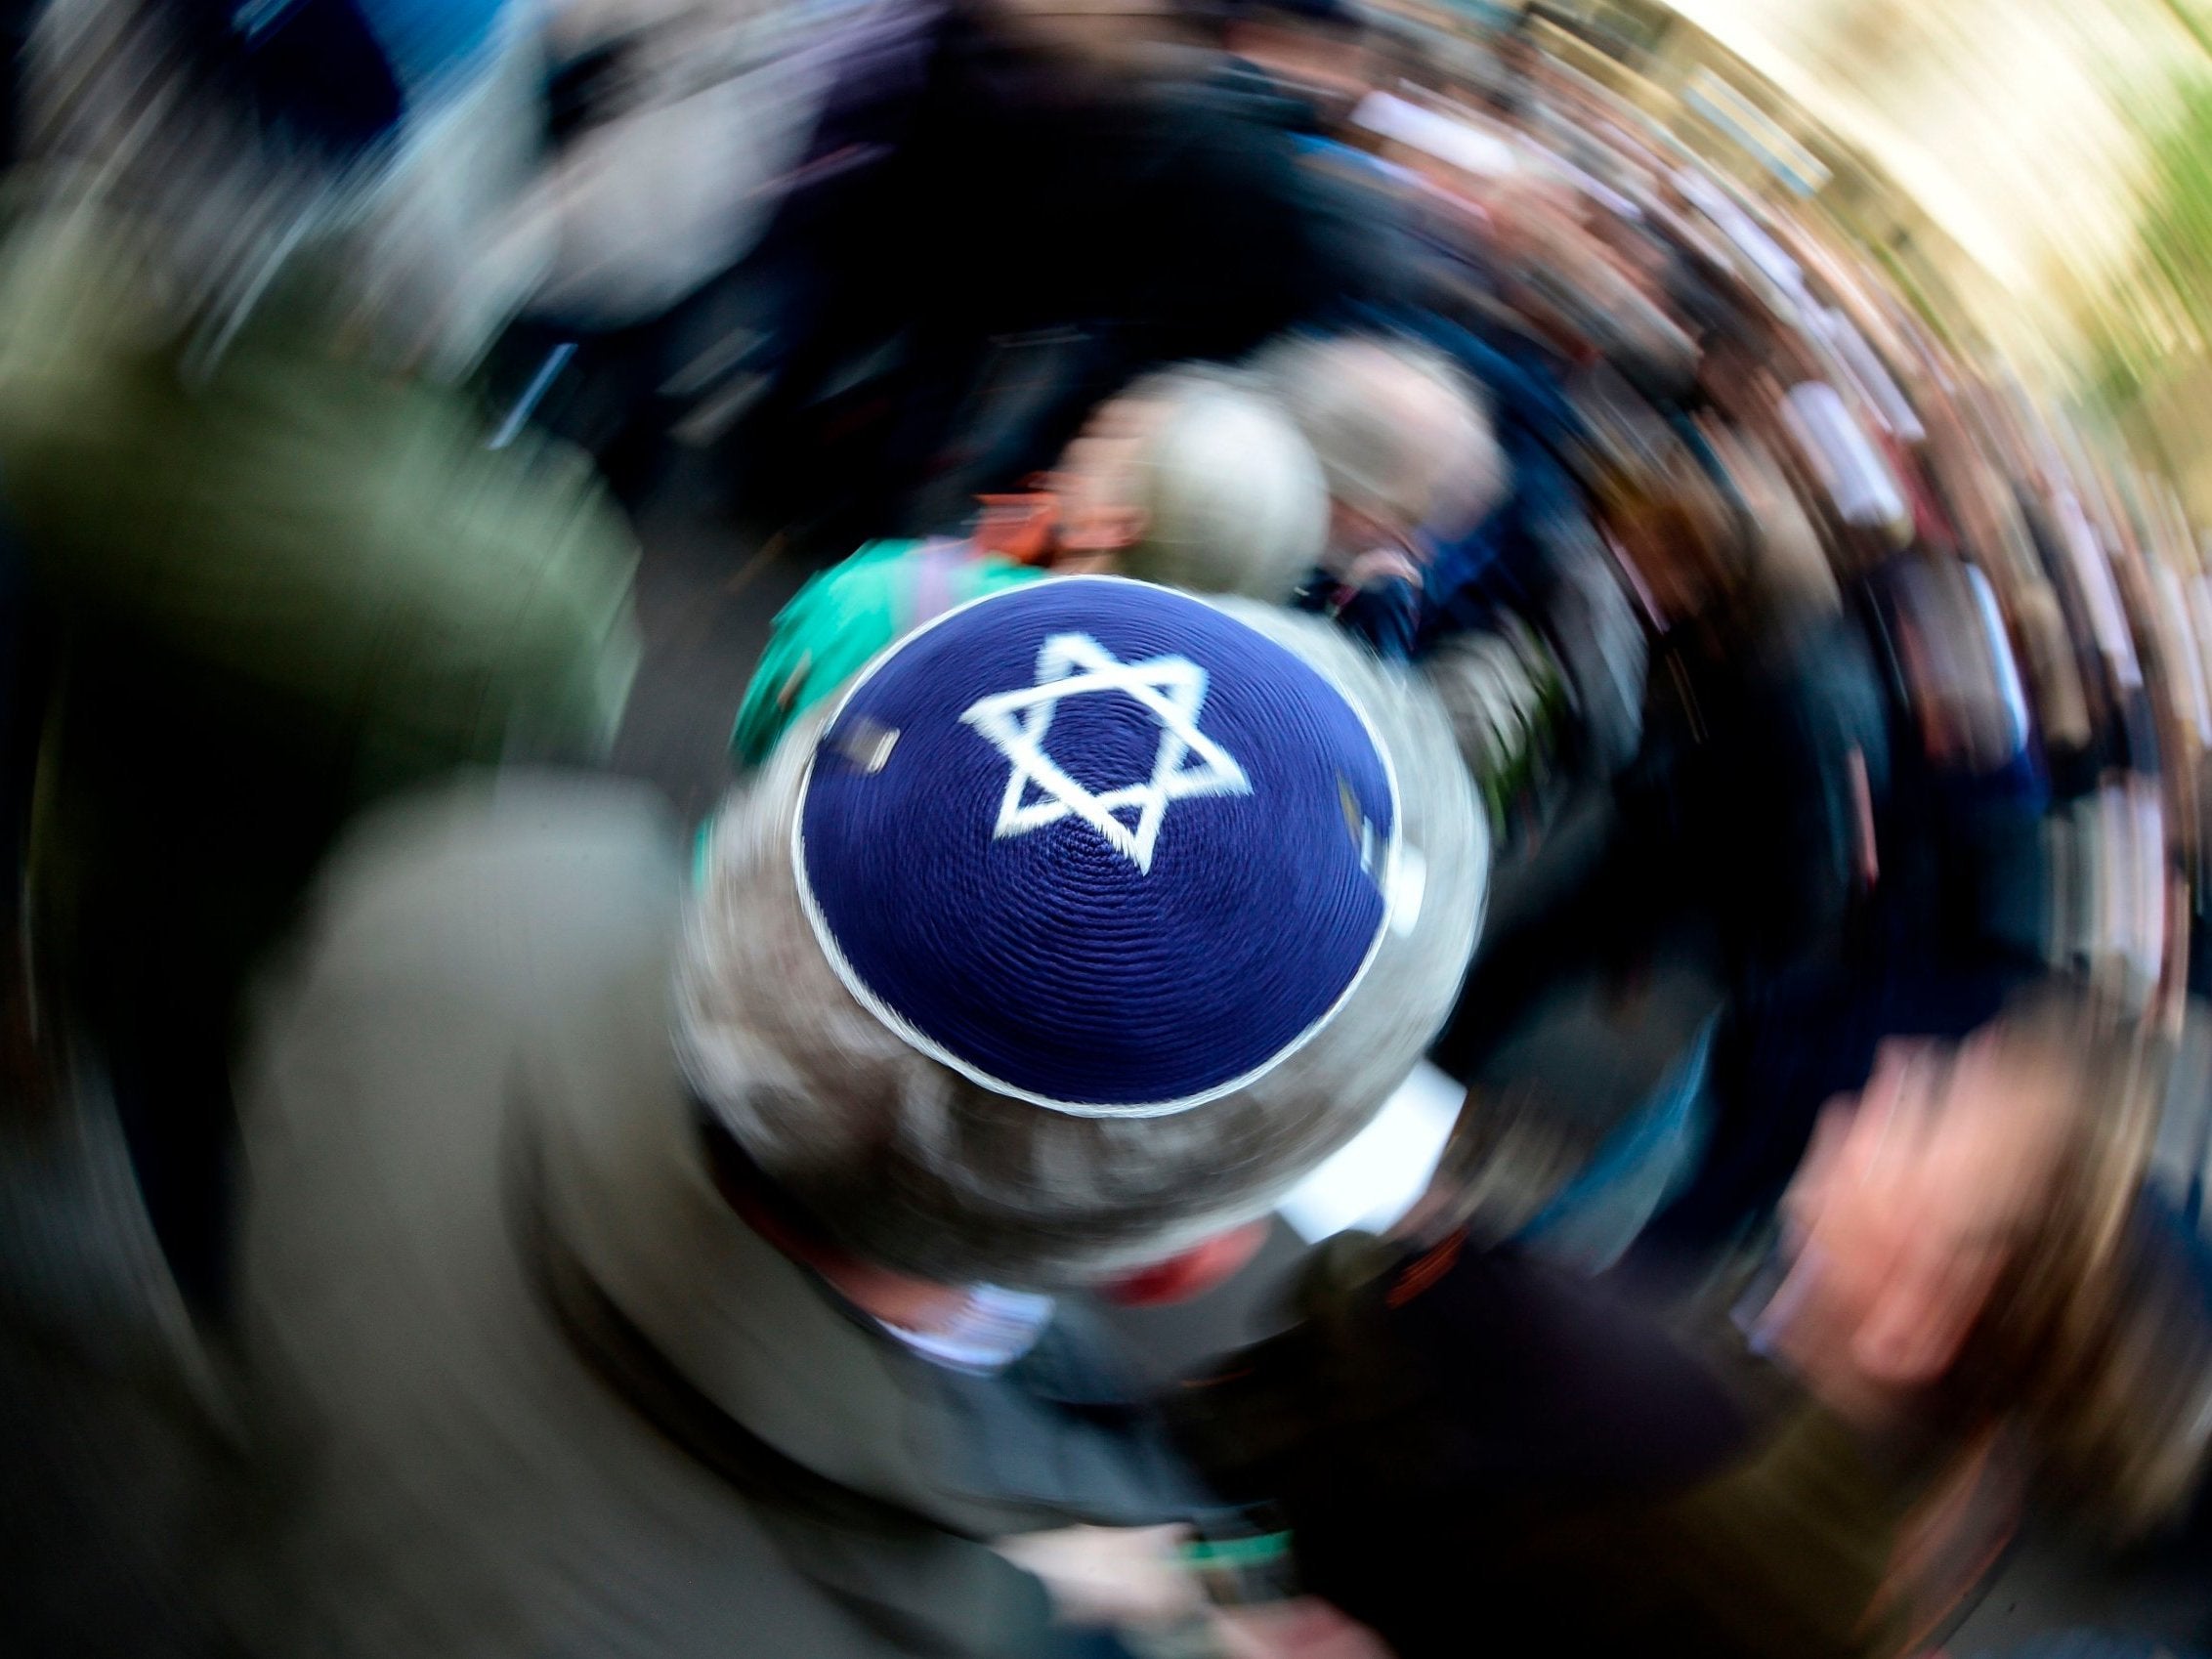 A man wears a kippa during the 'Berlin wears kippa' rally, organised after a spate of antisemitic attacks